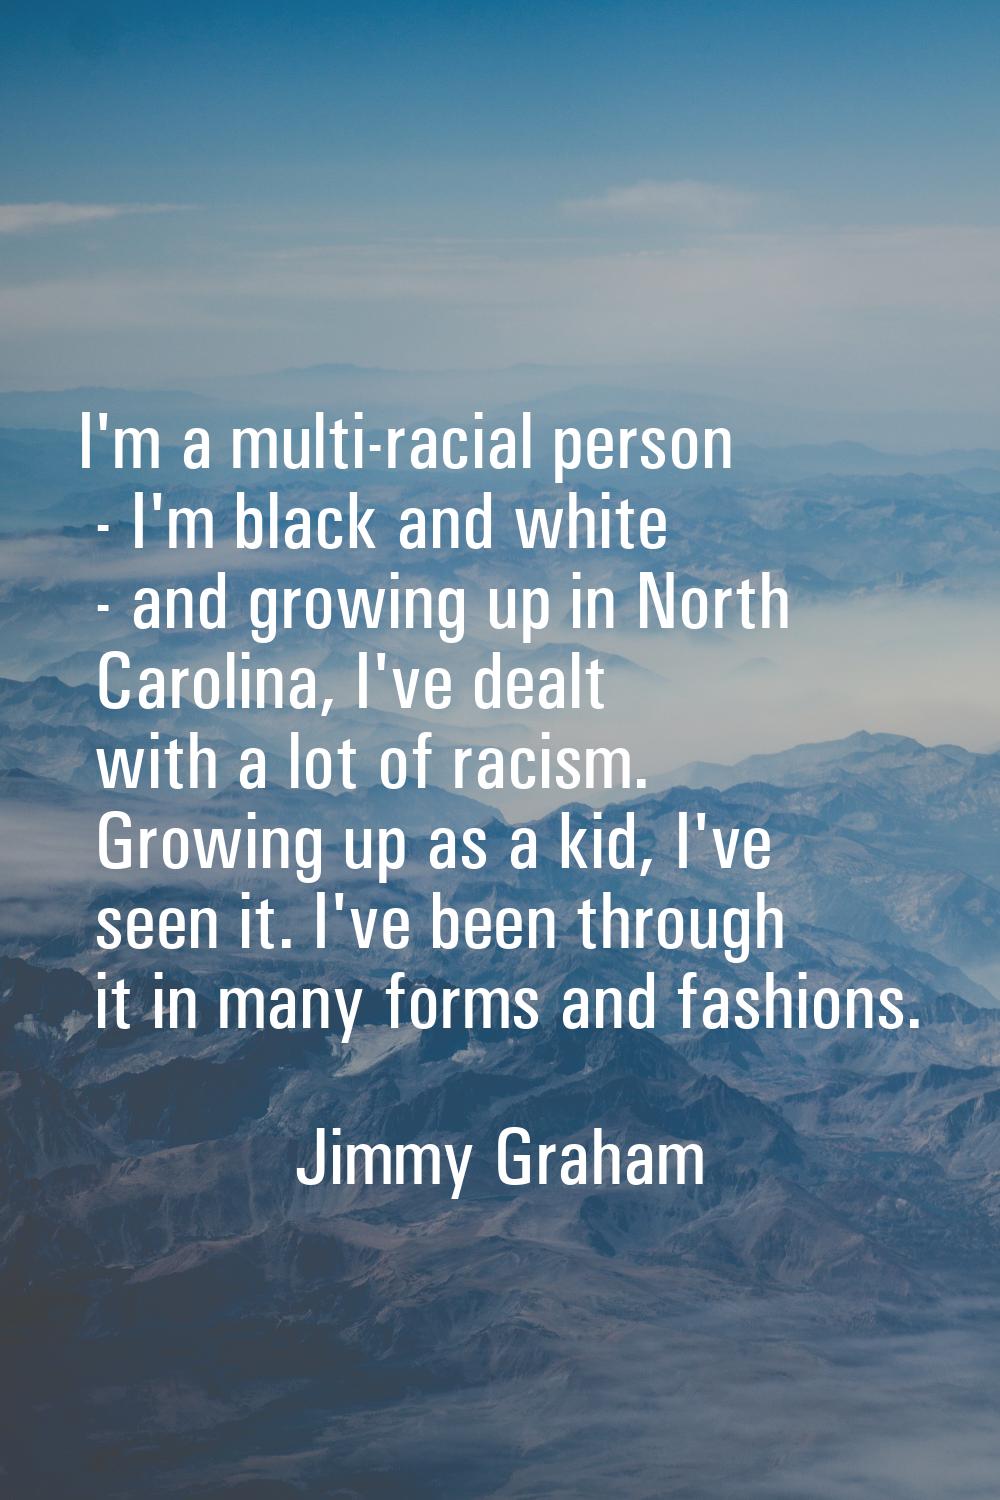 I'm a multi-racial person - I'm black and white - and growing up in North Carolina, I've dealt with